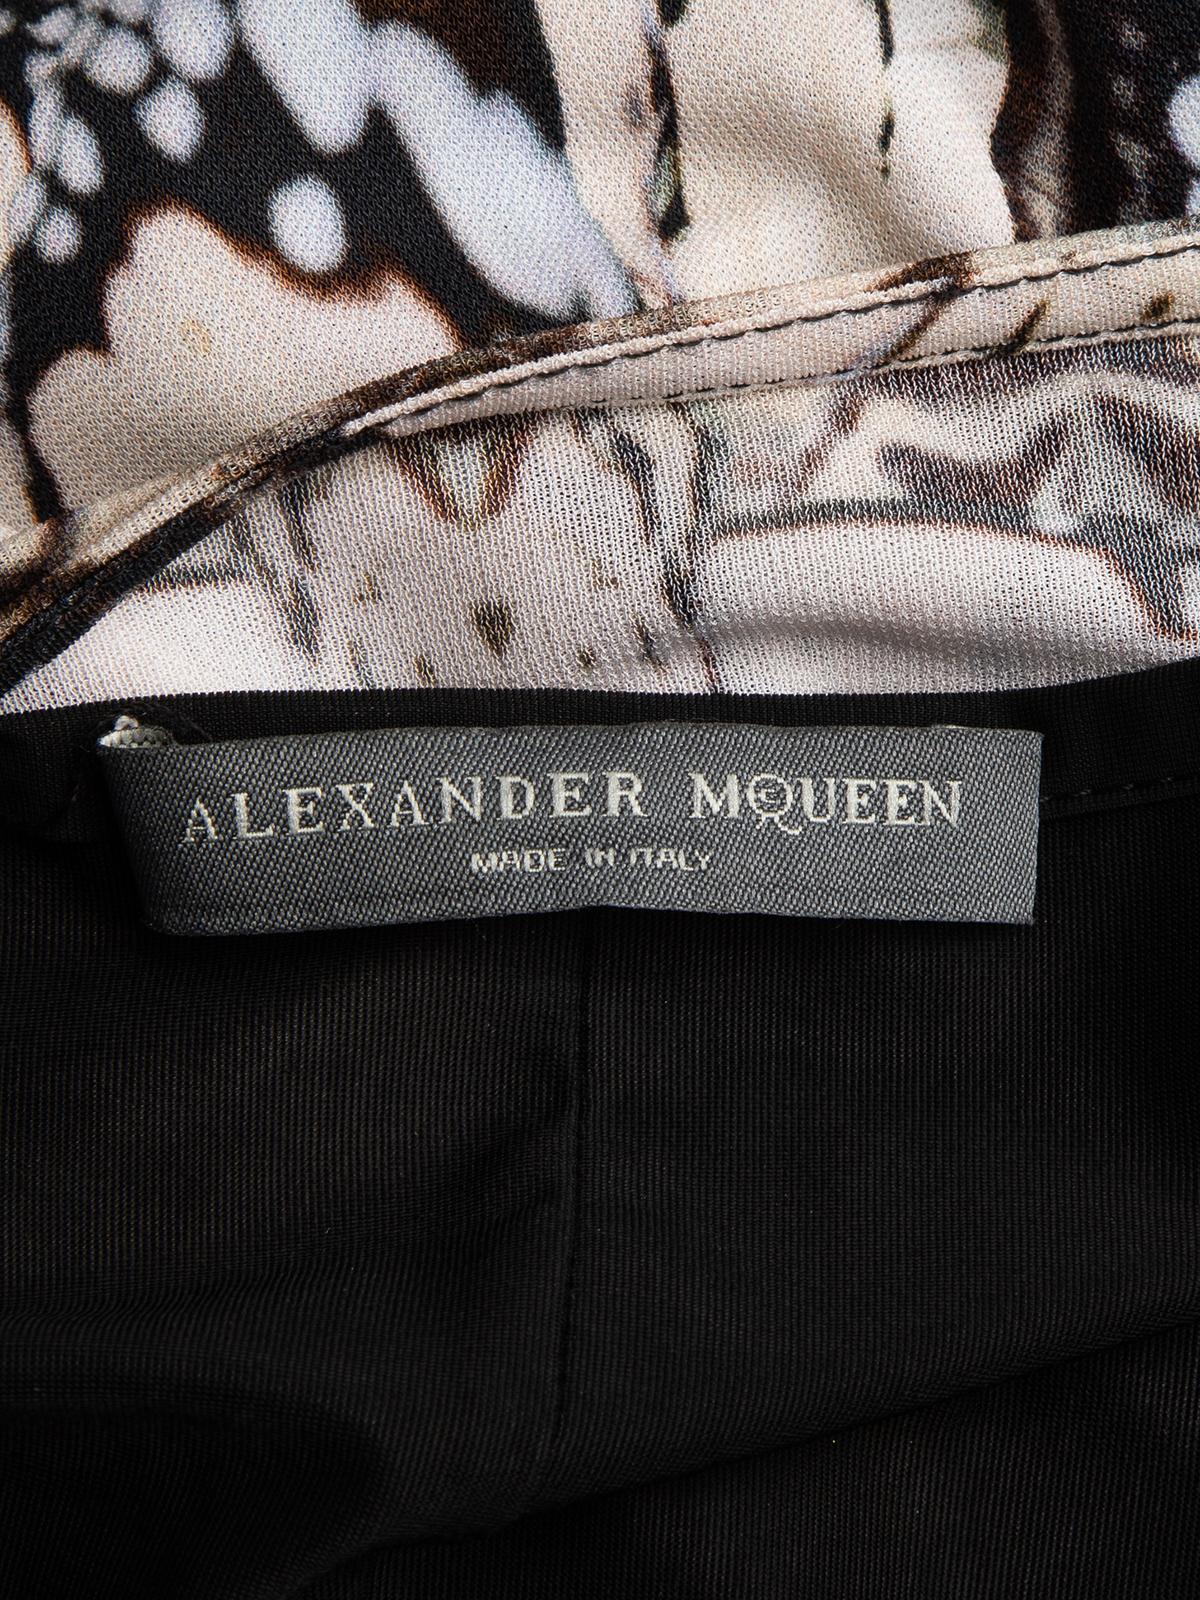 Pre-Loved Alexander McQueen Women's Patterned Sleeveless Dress In Excellent Condition In London, GB